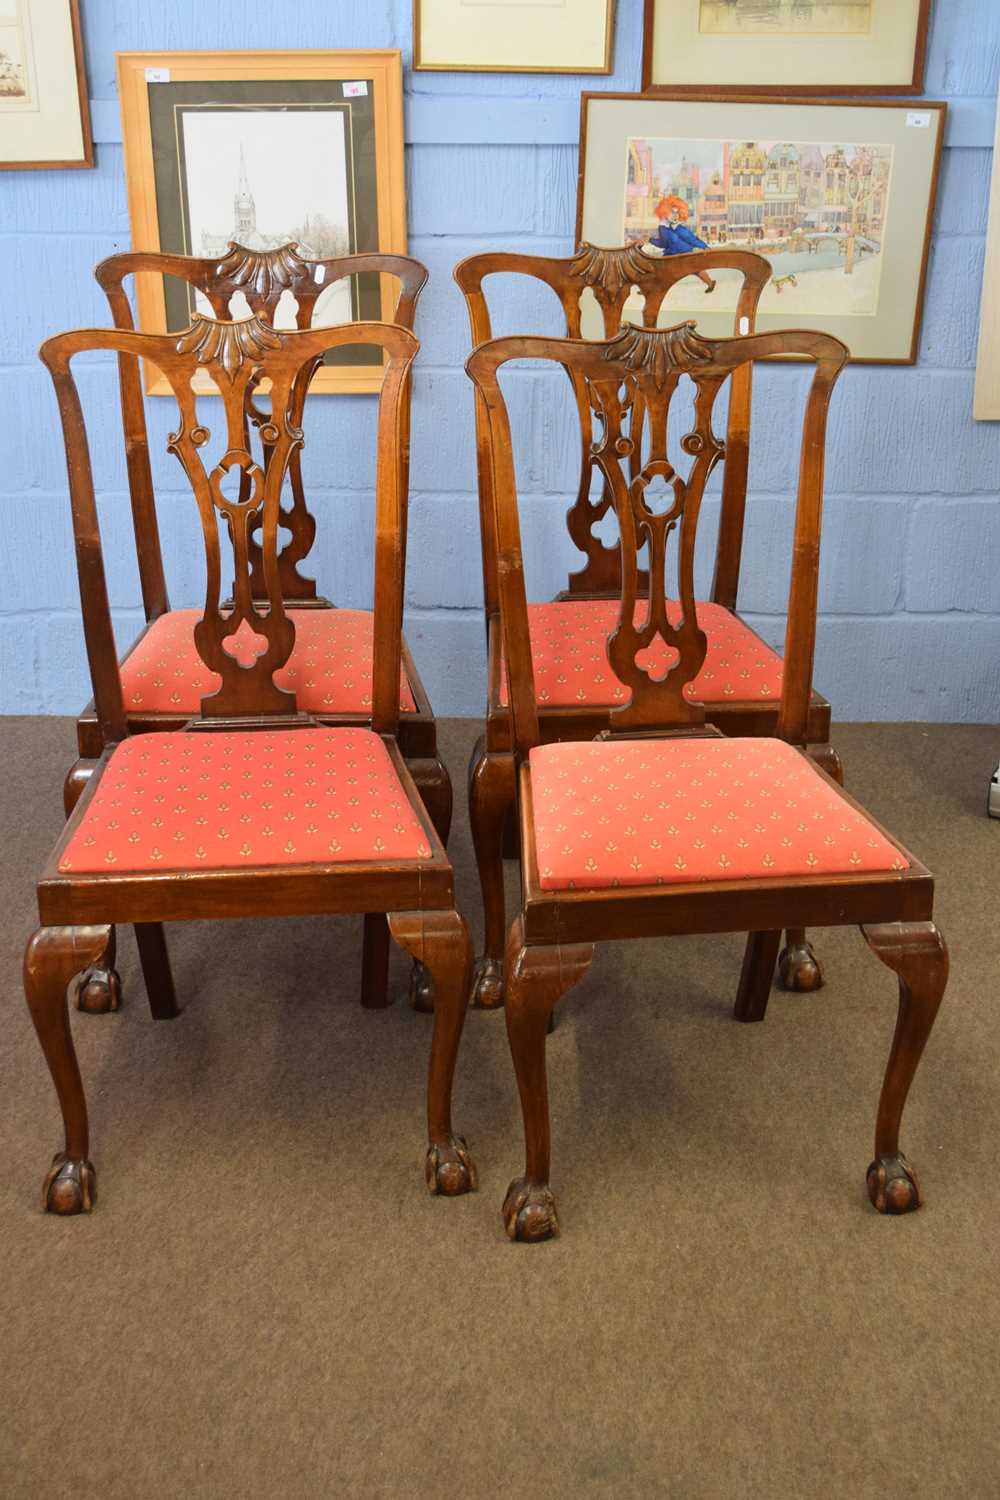 Set of four early 20th century mahogany framed dining chairs with pierced splat backs and ball and